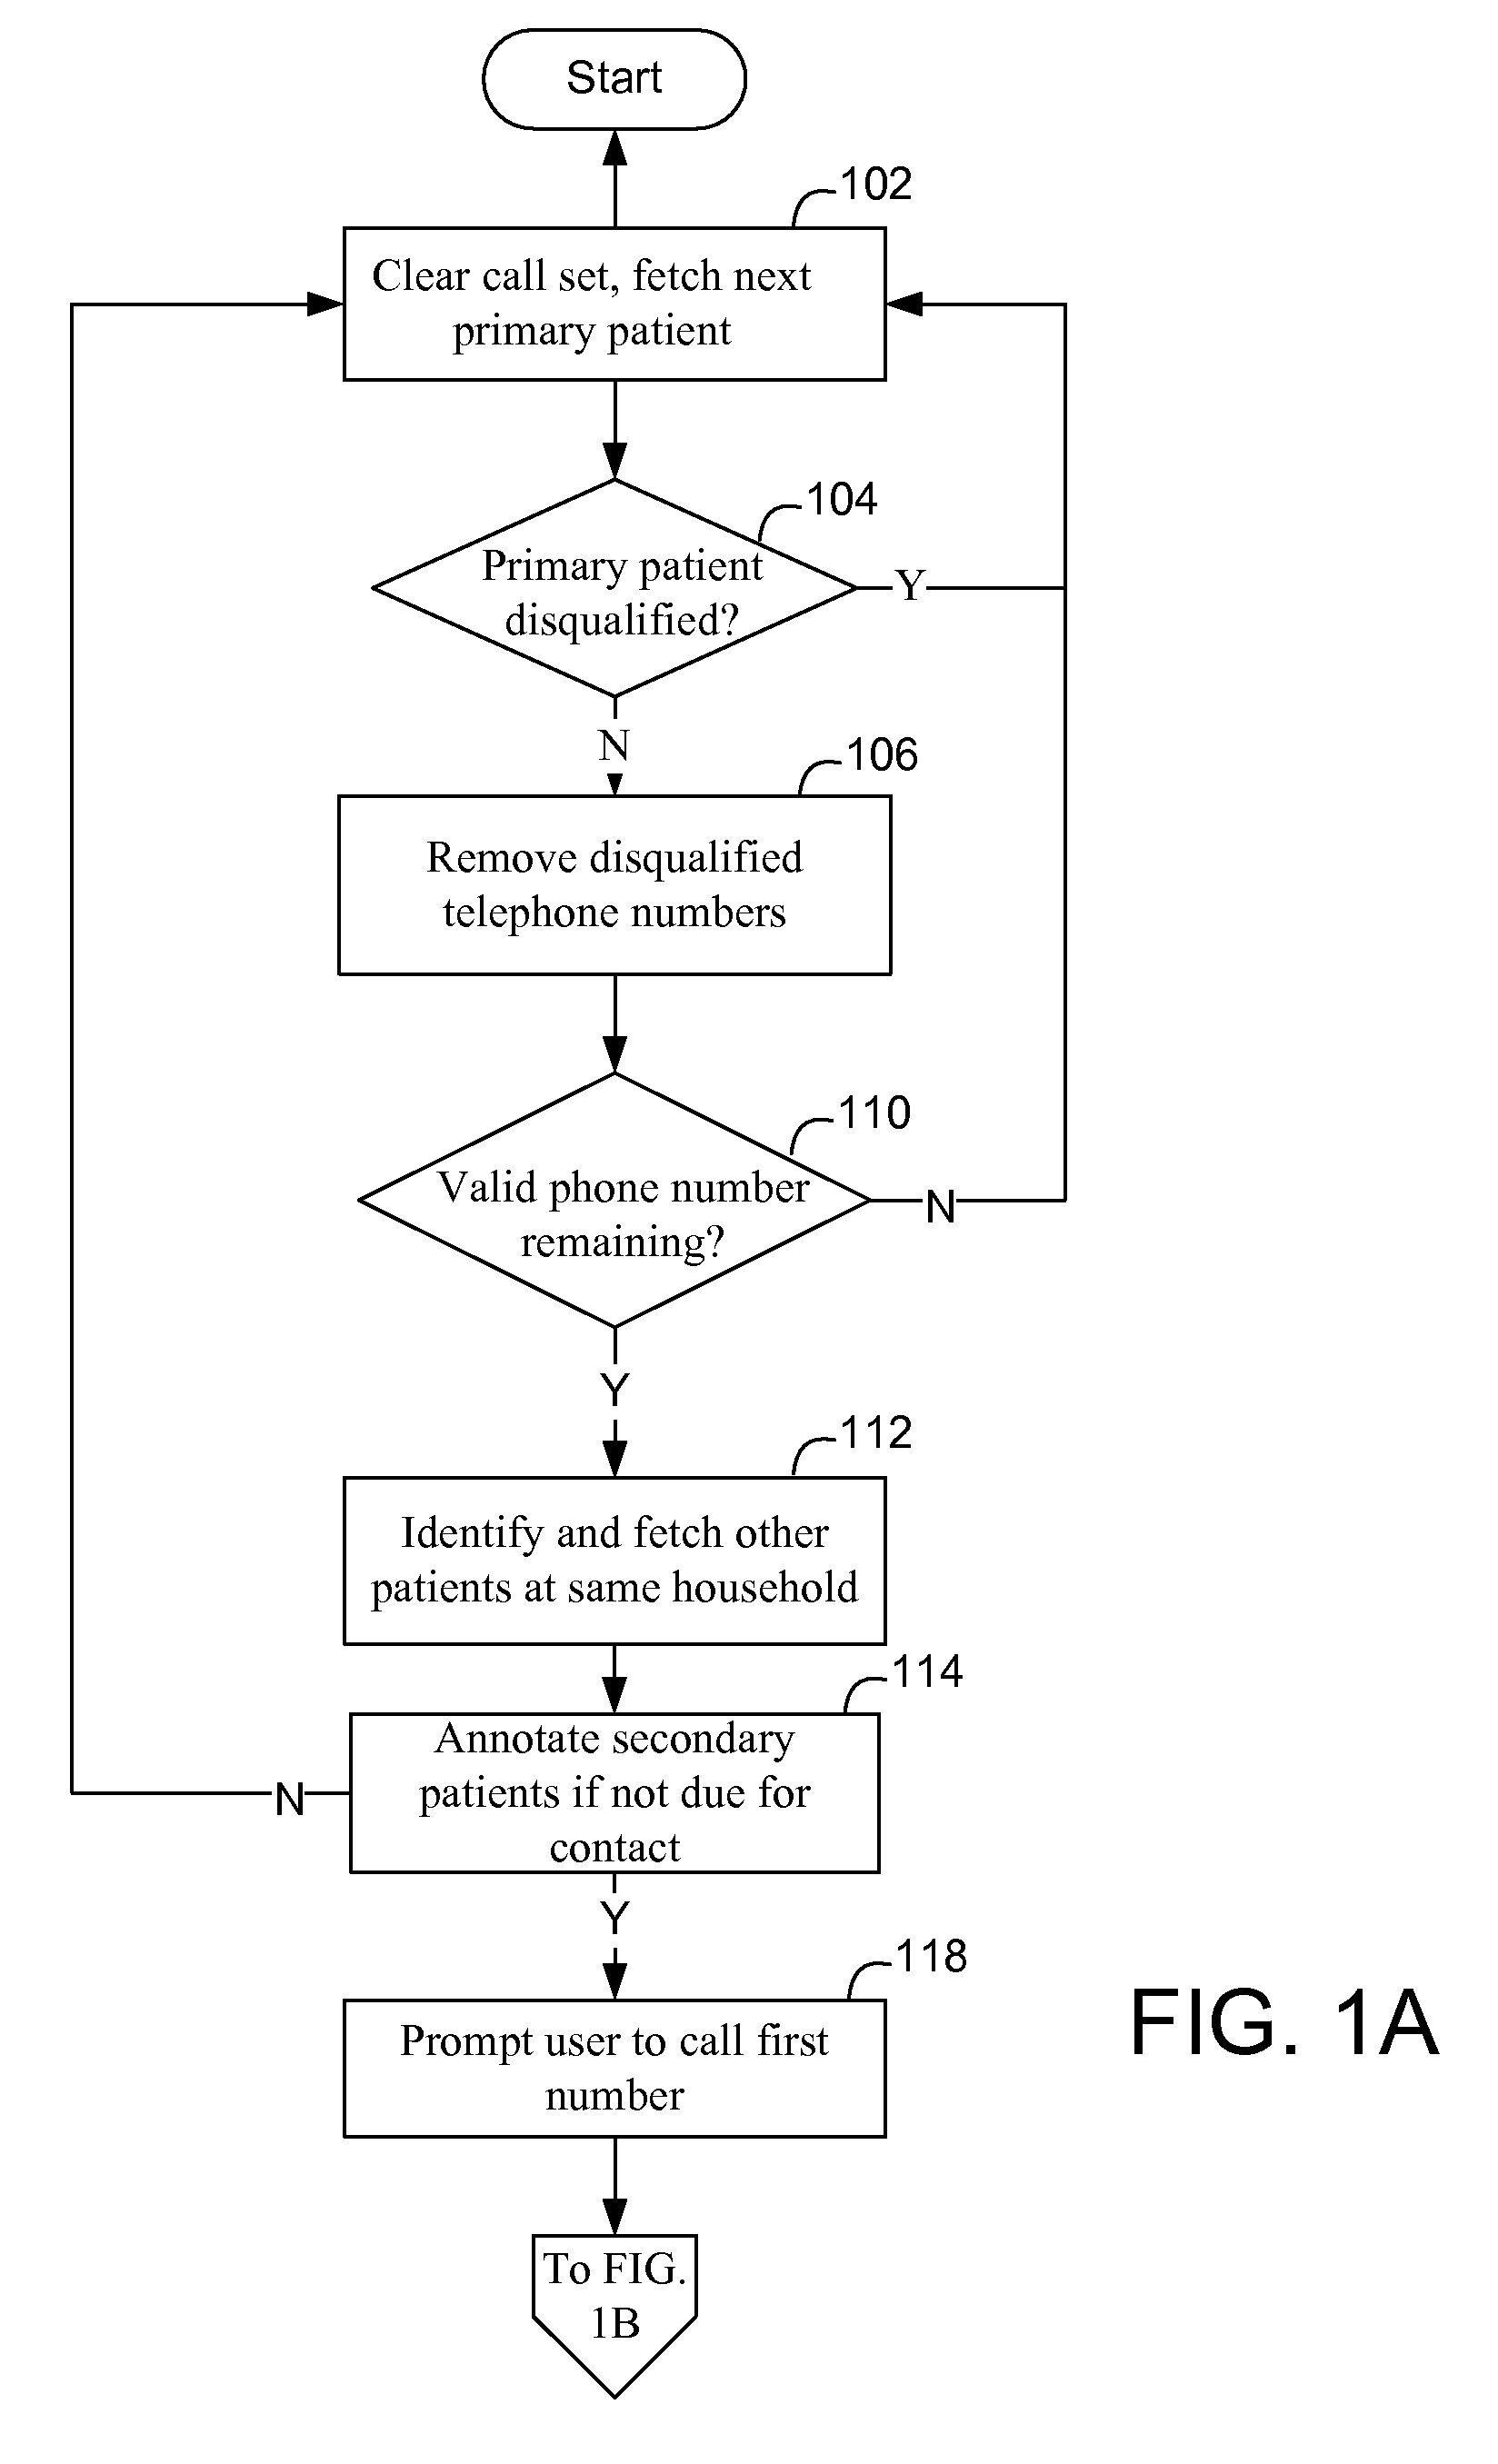 Method and apparatus for improving call yields when contacting patients who are due for a visit but do not have a scheduled appointment